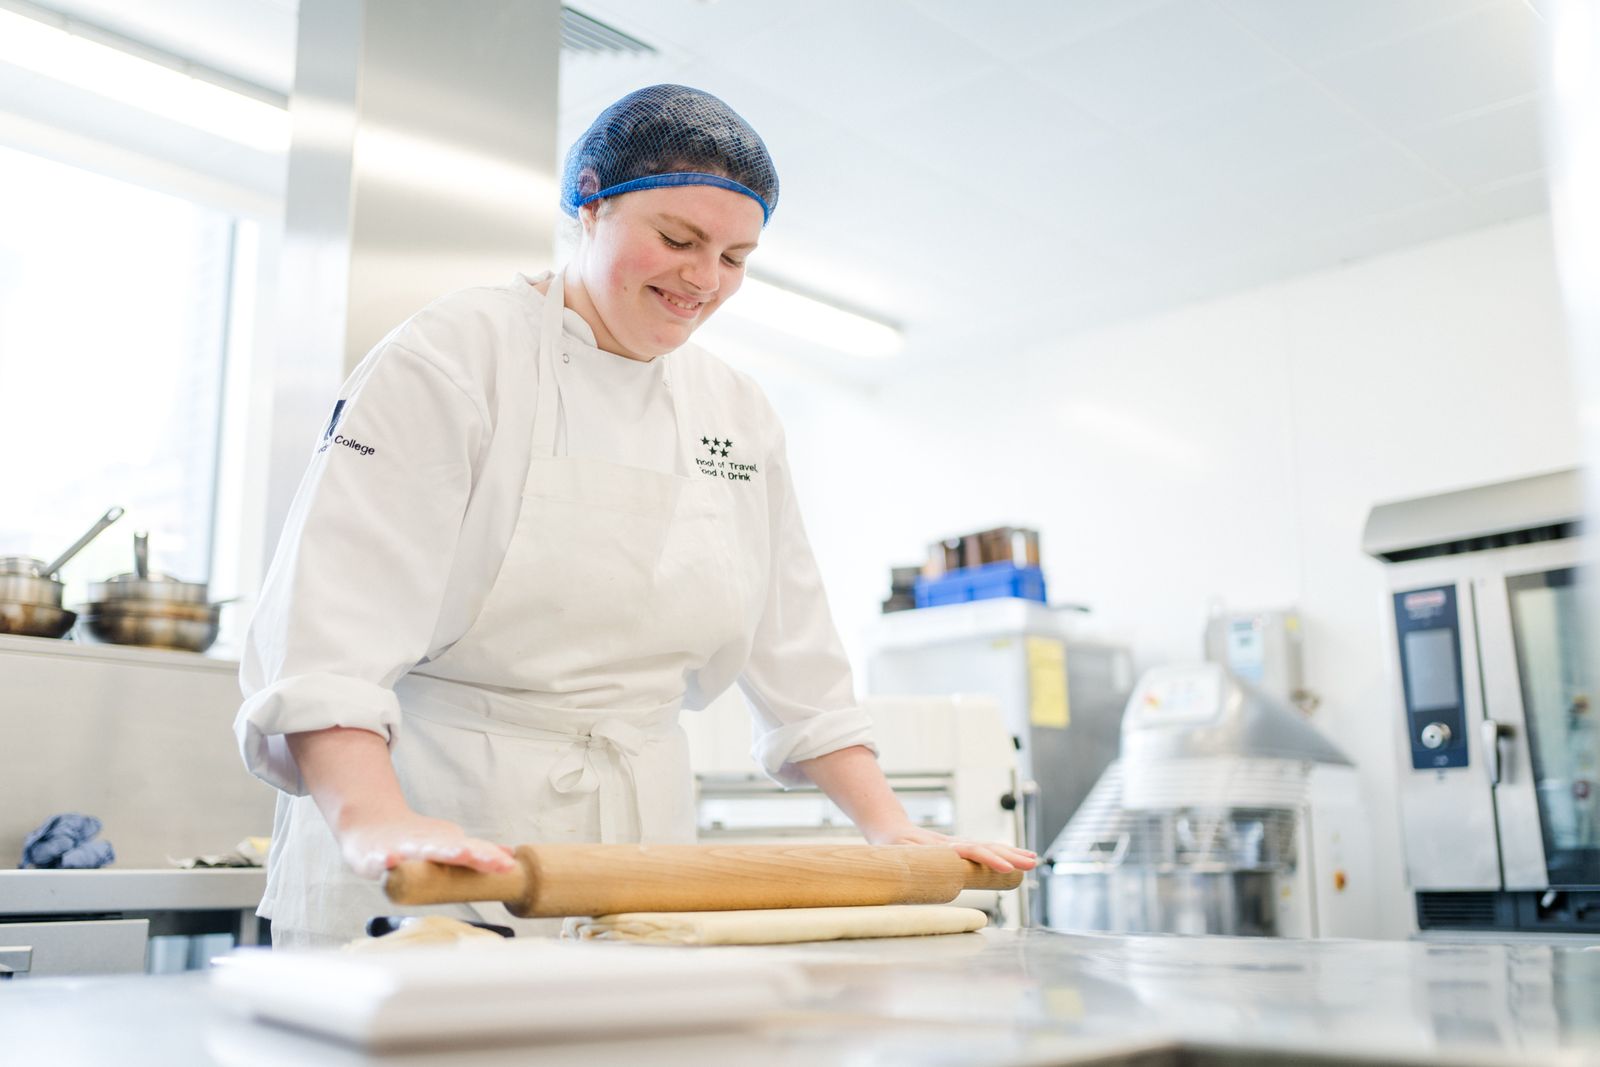 Leeds city college catering student rolling dough